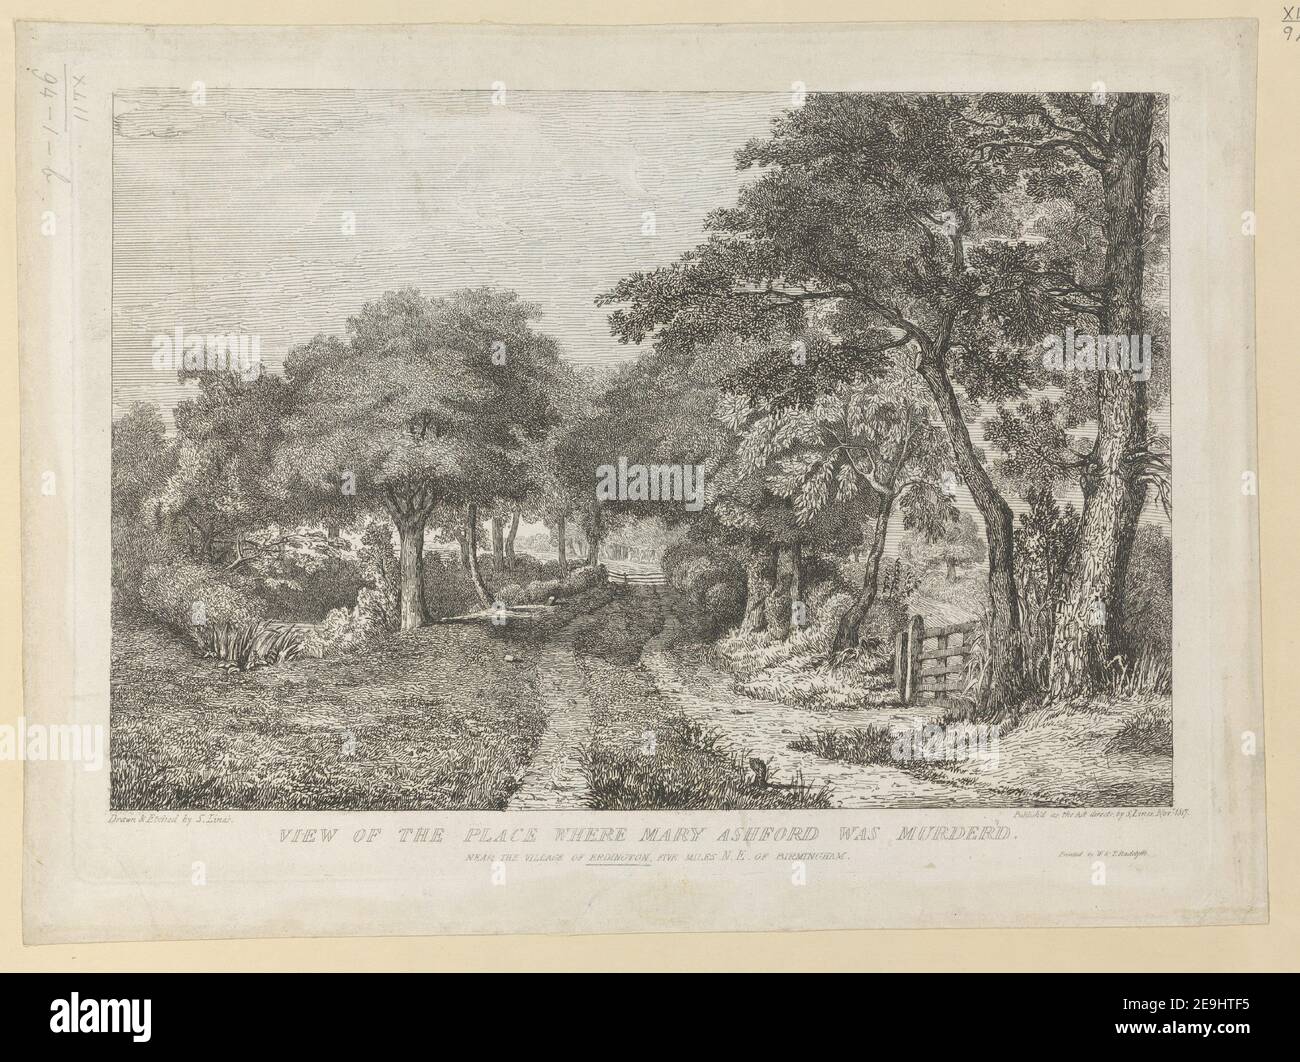 VIEW OF THIS PLACE WHERE MARY ASHFORD WAS MURDERED.  Author  Lines, Samuel 42.94.1.b. Place of publication: [Birmingham] Publisher: Publish'd as the Act directs, by S. Lines Nov.r., Date of publication: 1817.  Item type: 1 print Medium: etching Dimensions: platemark 25.2 x 35.0 cm  Former owner: George III, King of Great Britain, 1738-1820 Stock Photo